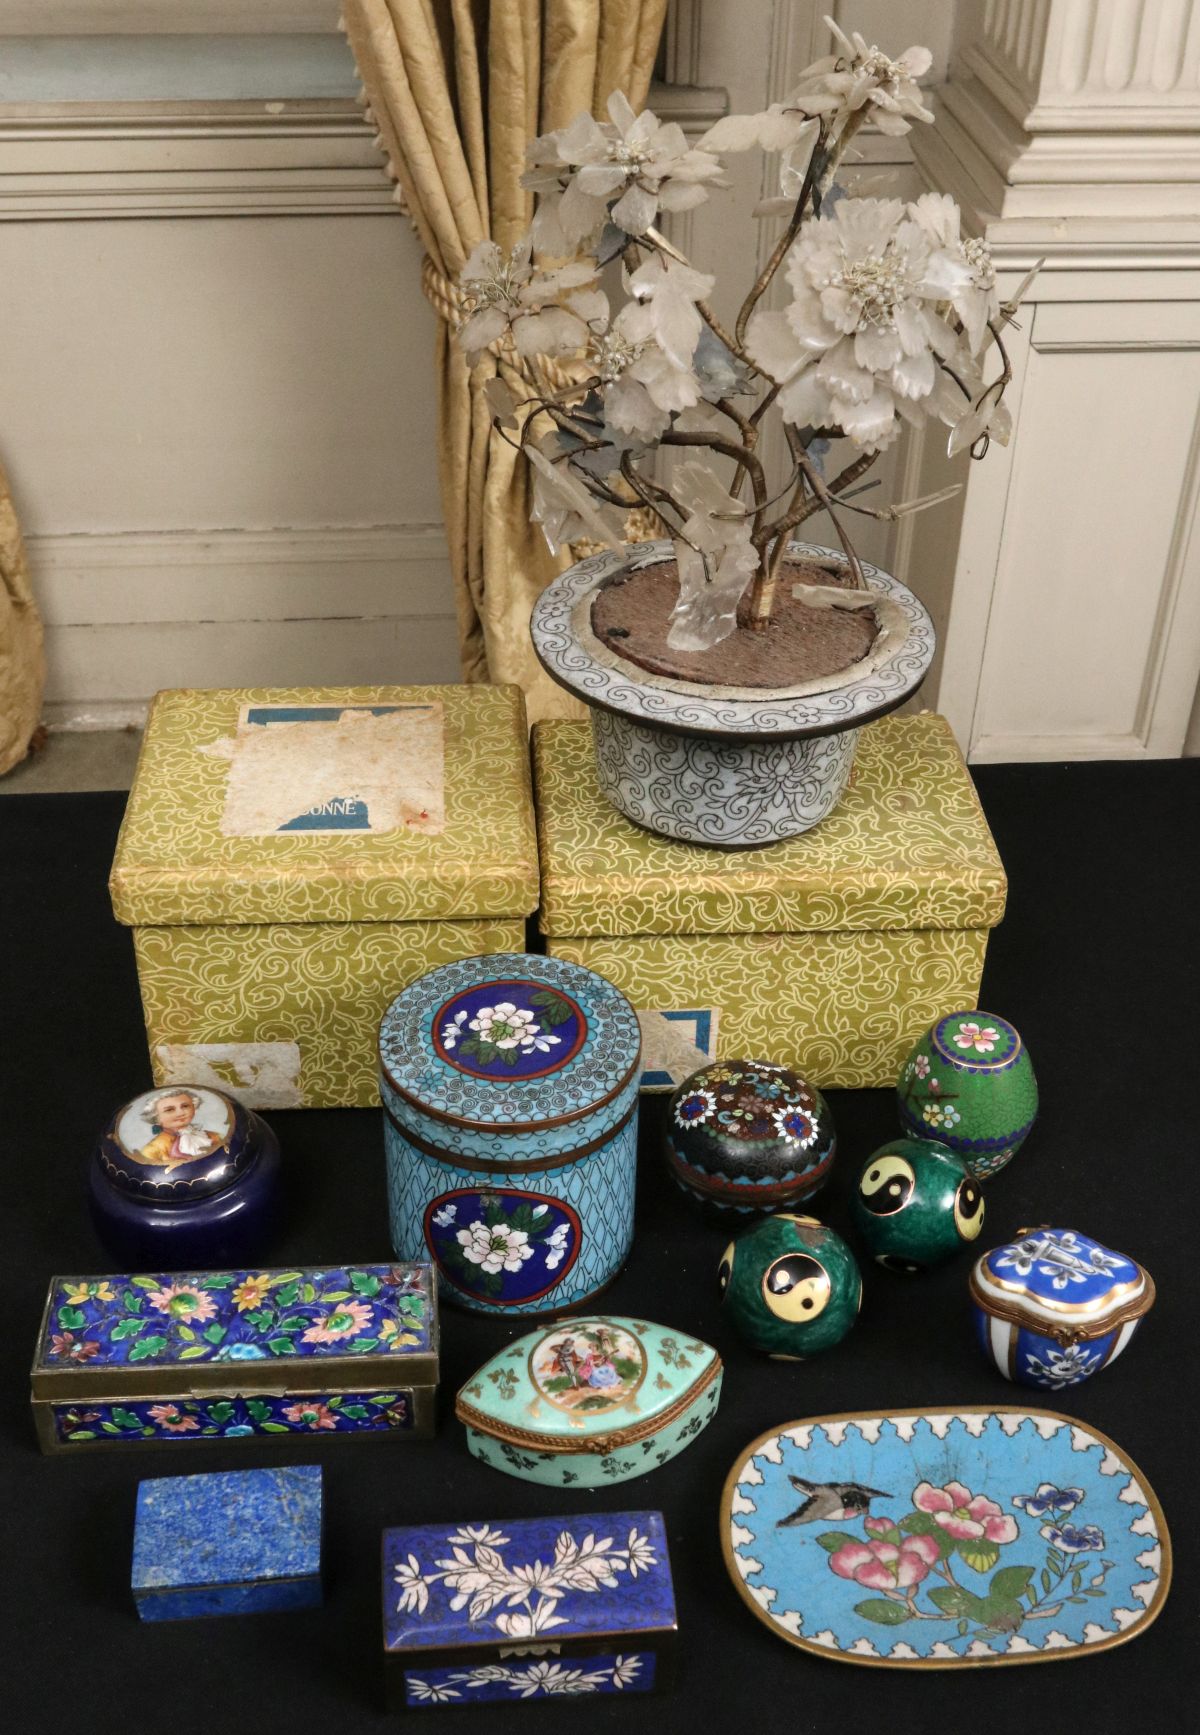 A COLLECTION OF CLOISONNE AND OTHER ART OBJECTS